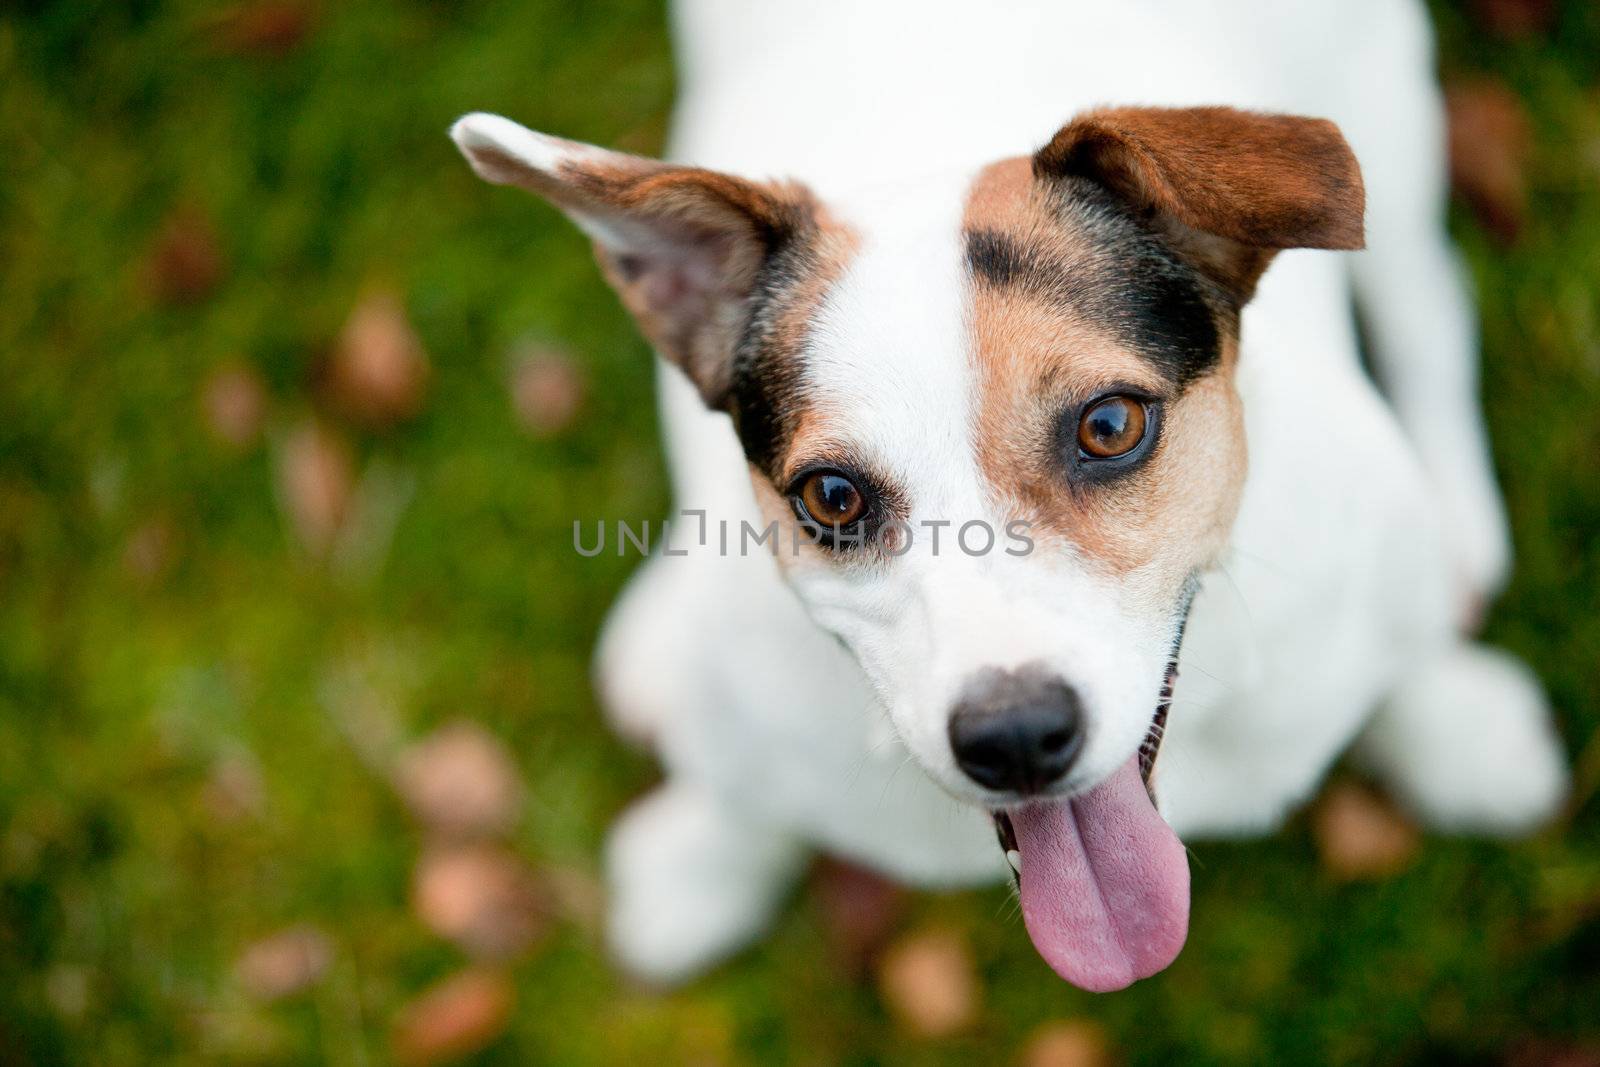 Jack Russell Terrier on the grass